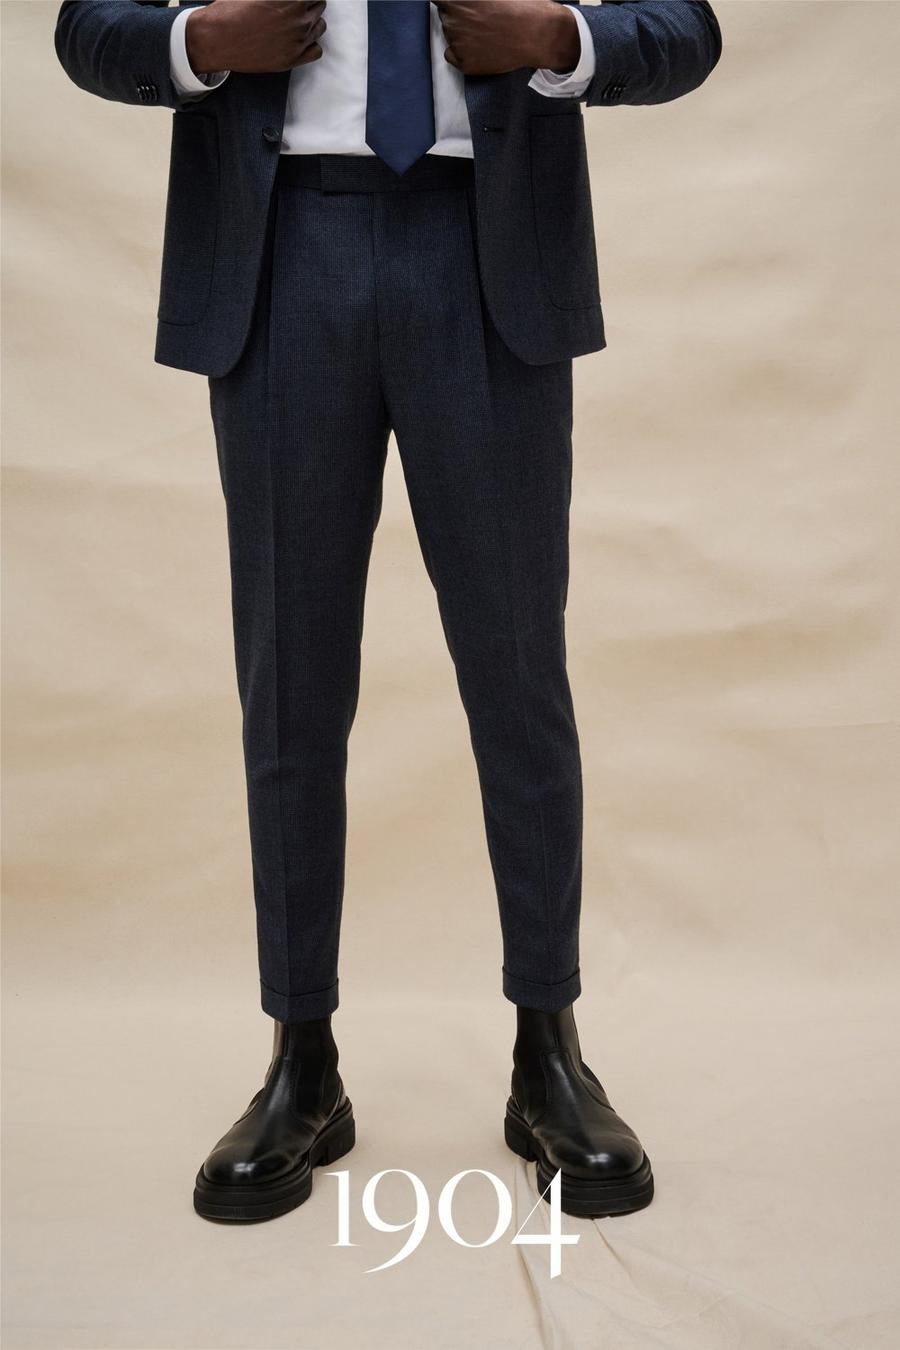 1904 Blue Puppytooth Wool Turn Up Suit Trouser